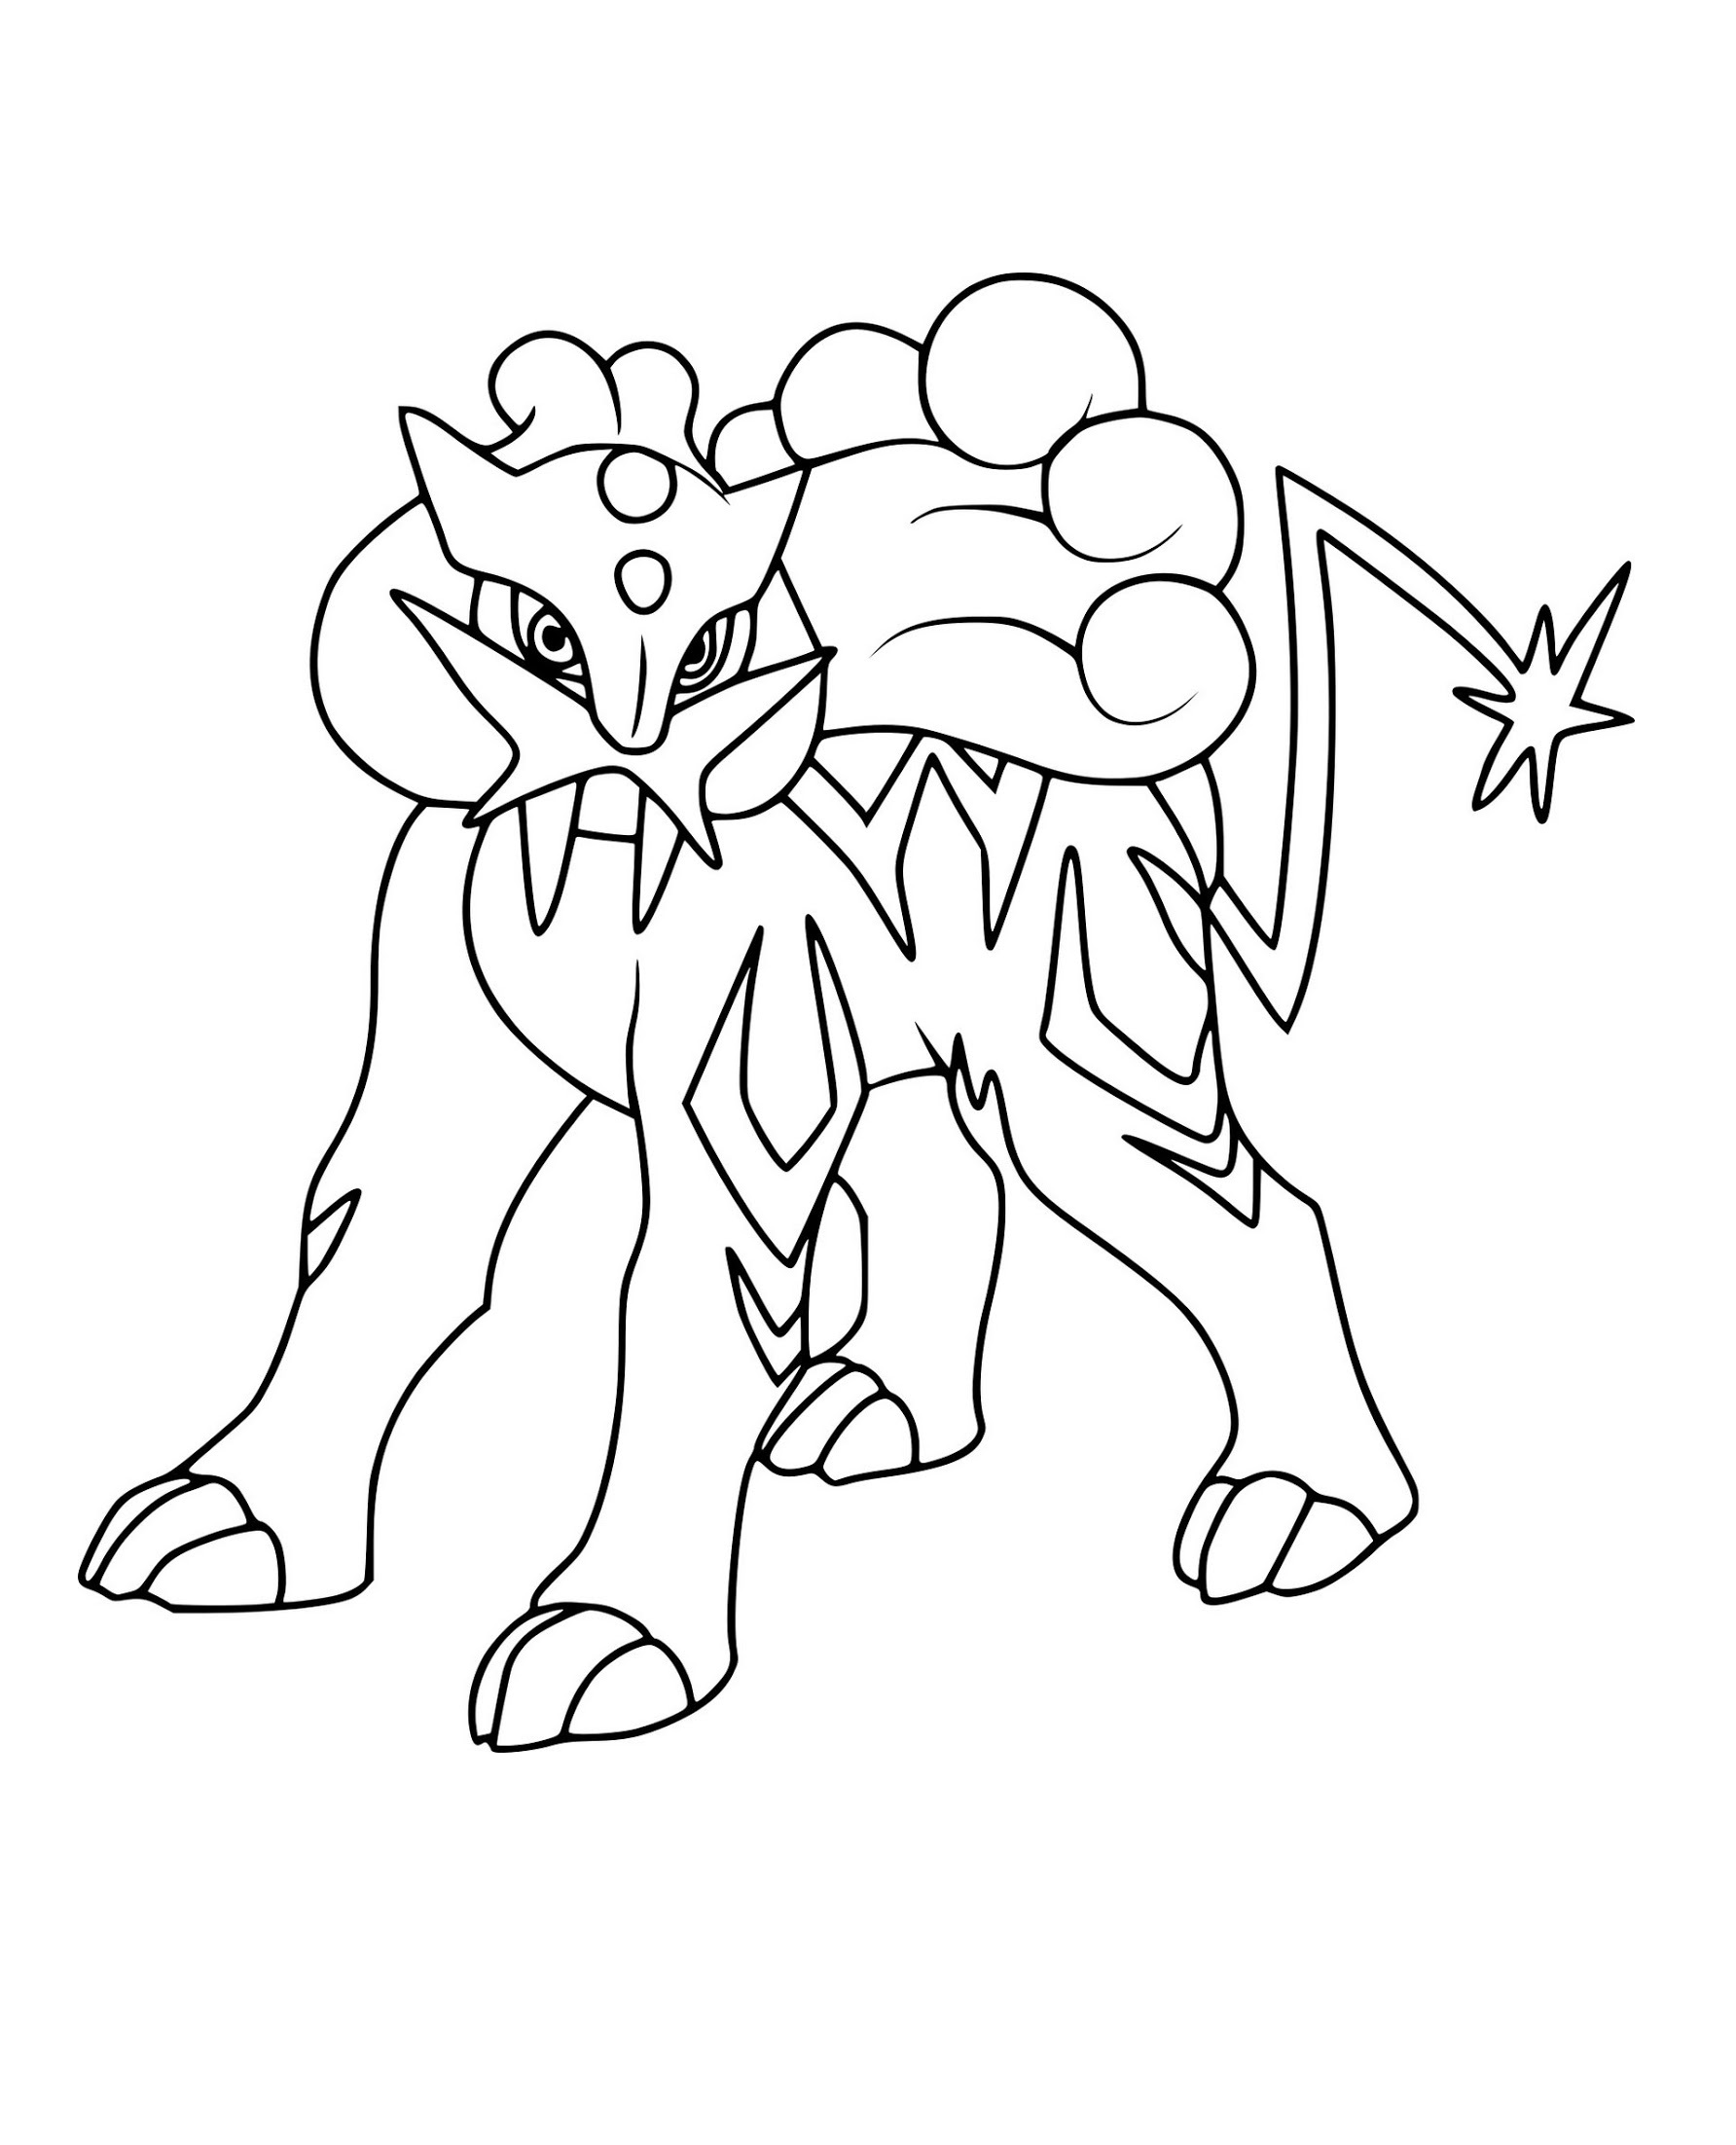 Printable Legendary Pokemon Coloring Pages - raikou legendary pokemon coloring pages